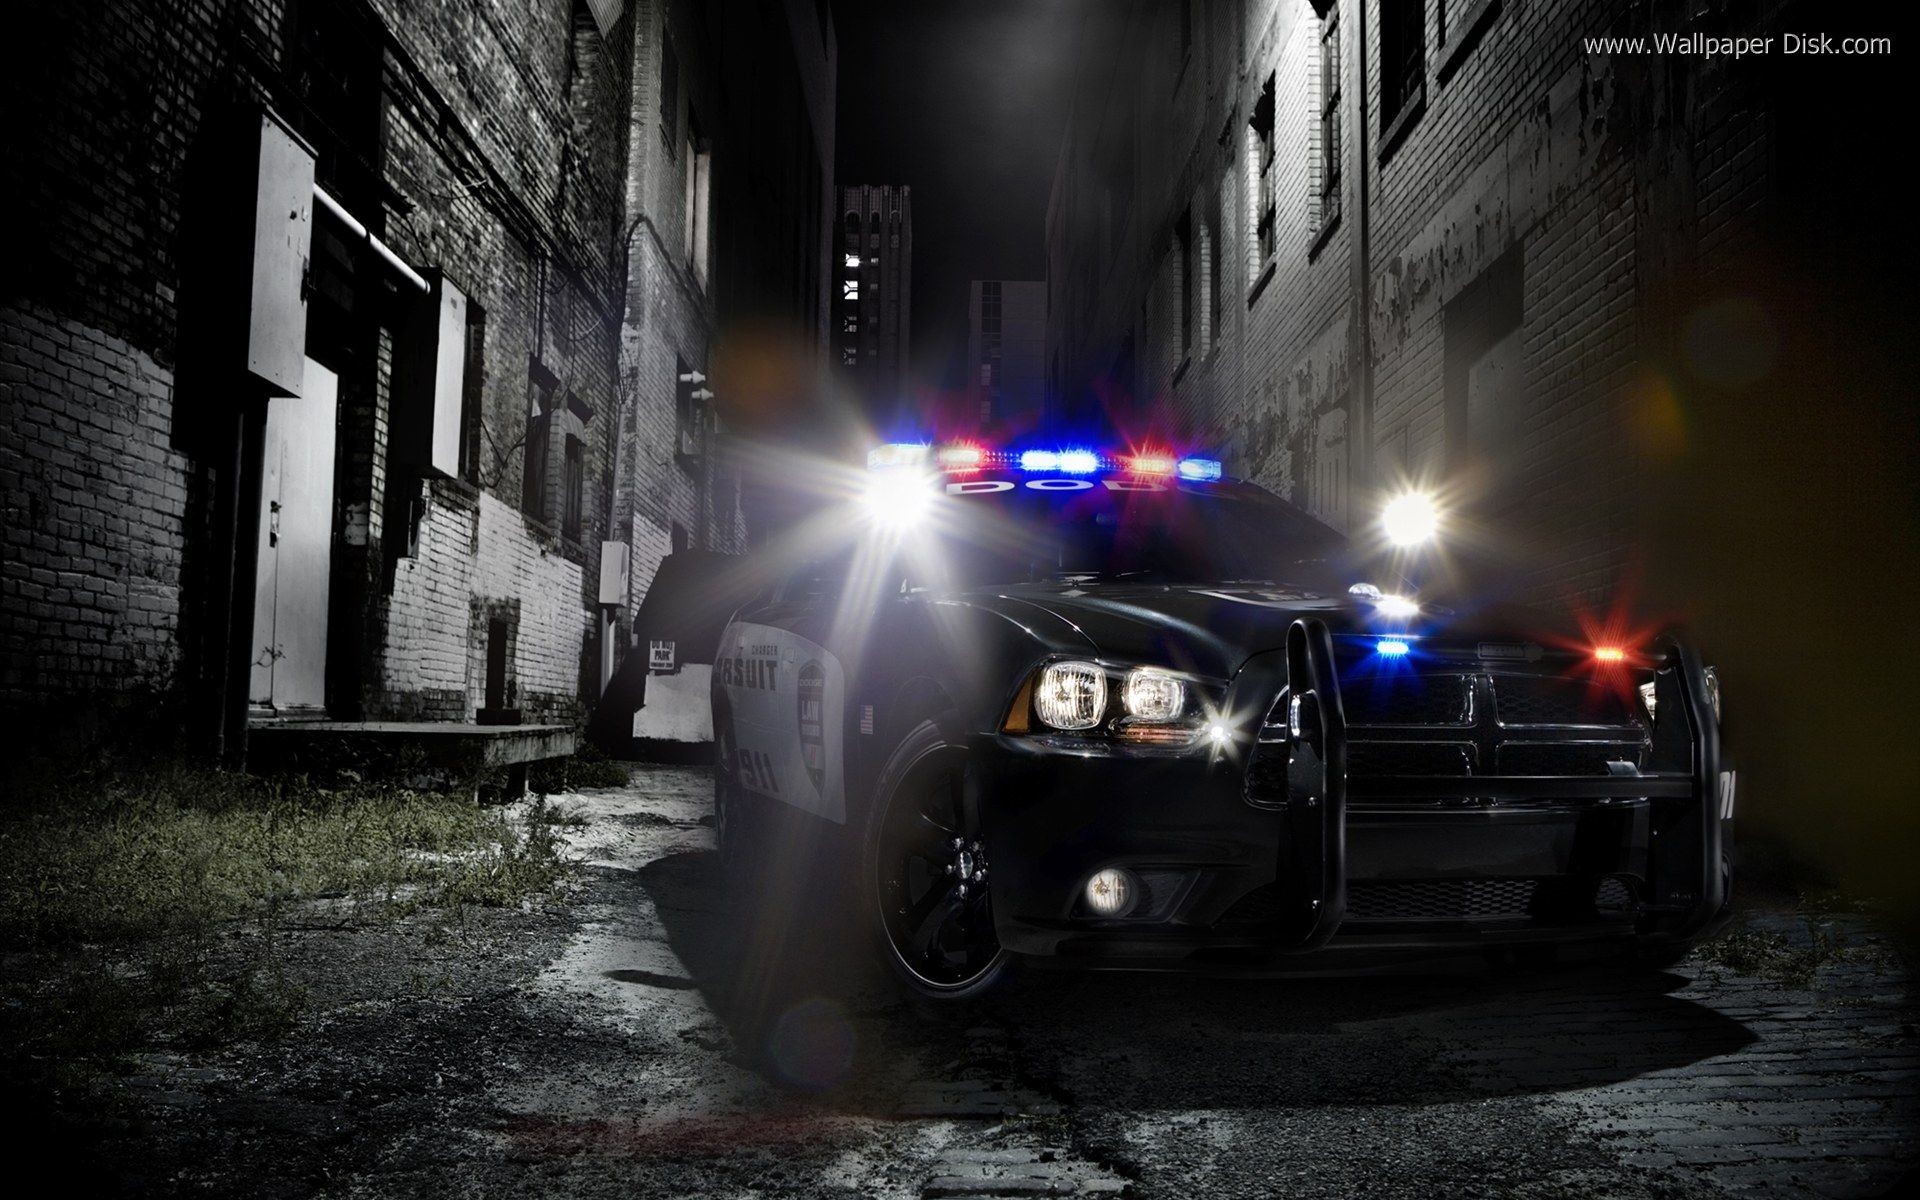 Police Thin Blue Line Wallpaper Image